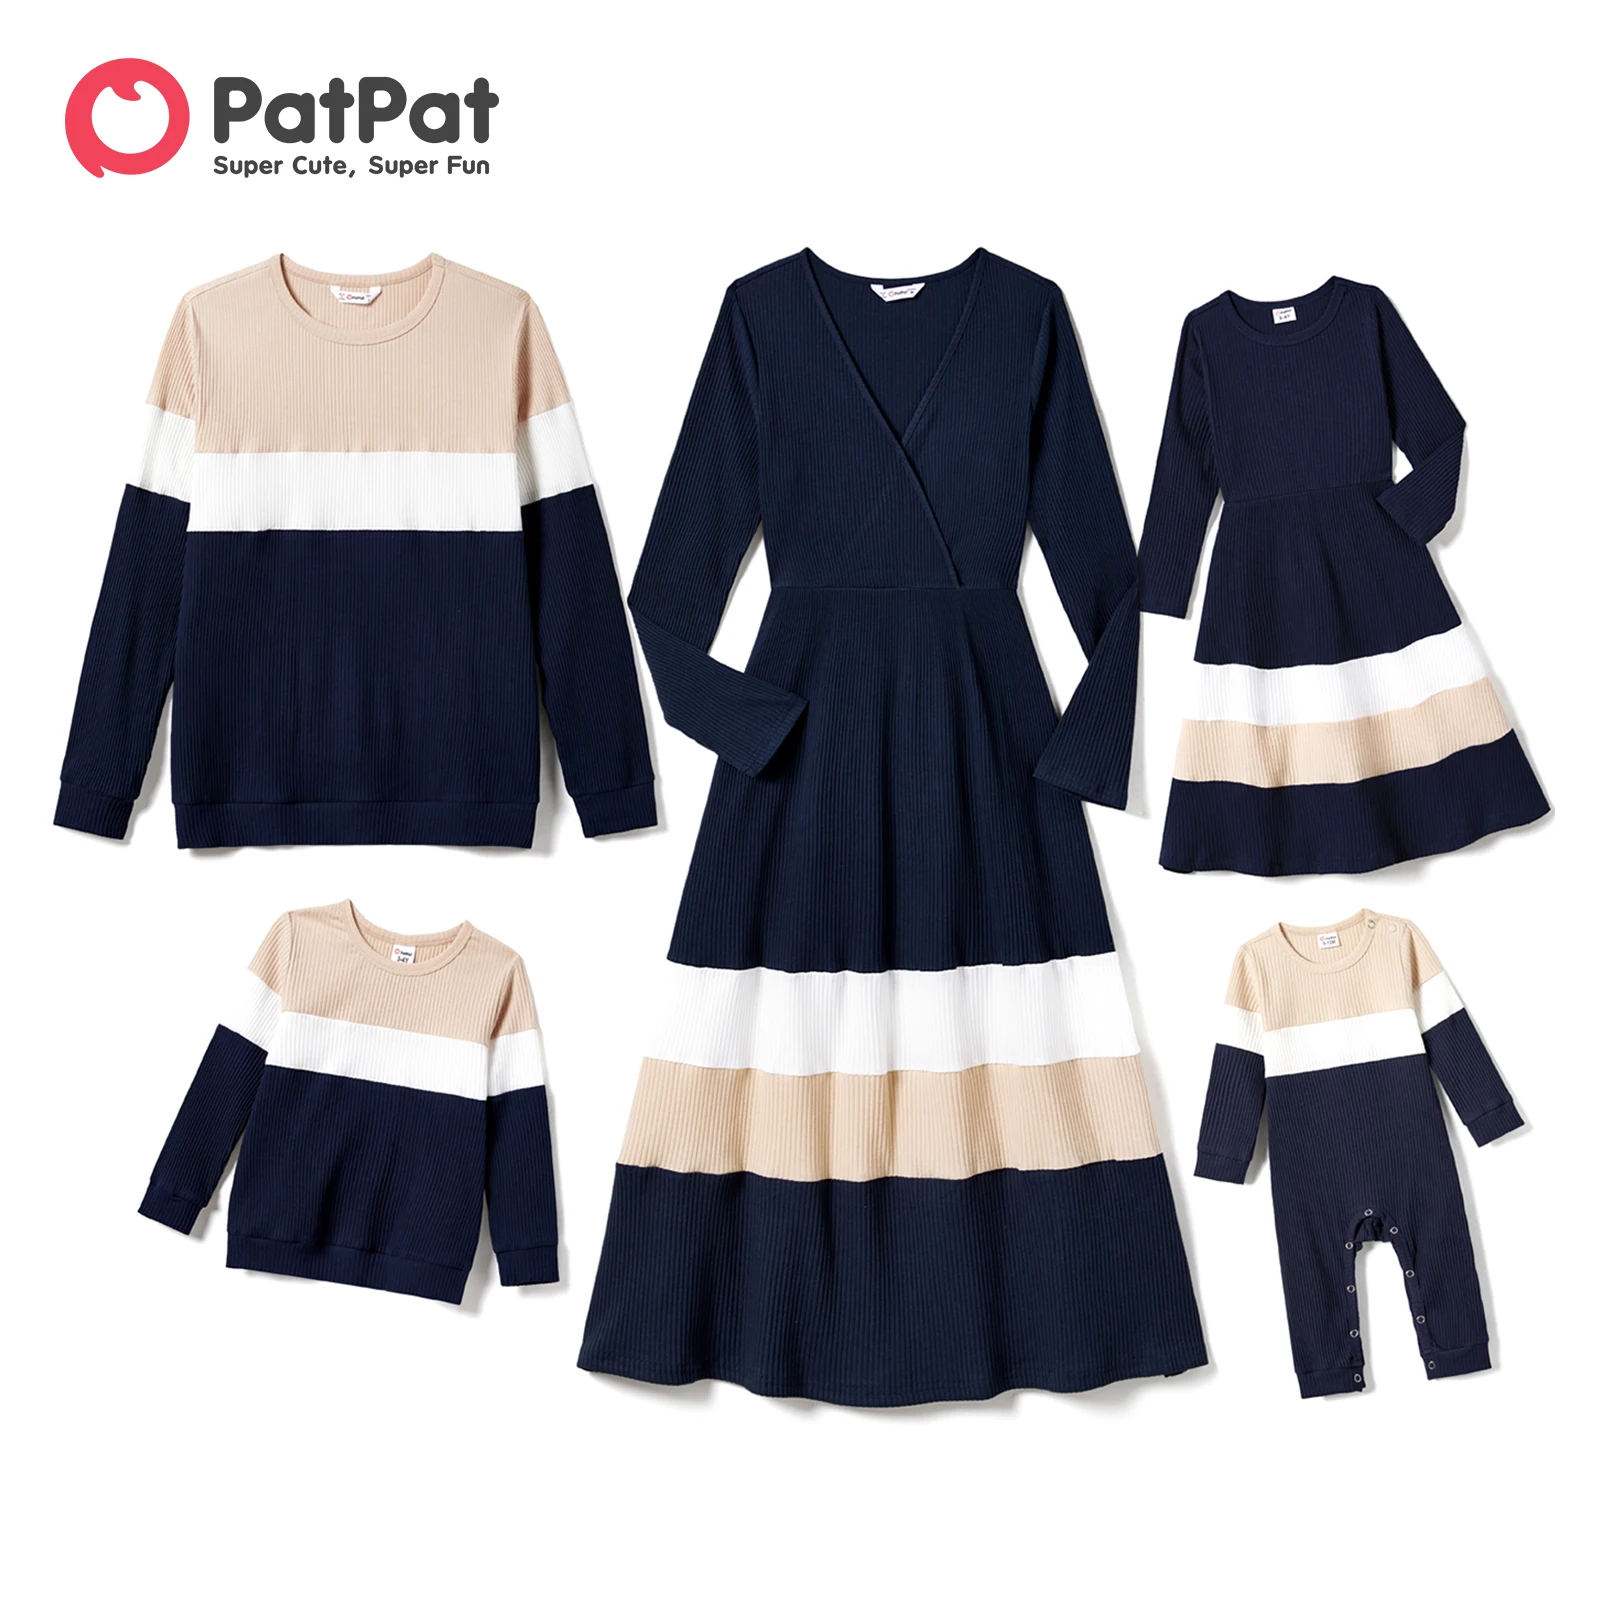 PatPat Family Matching Outfits Color-Block Knit Long-Sleeve Women's Dresses and Tops Sets Matching Family Look Clothes Set